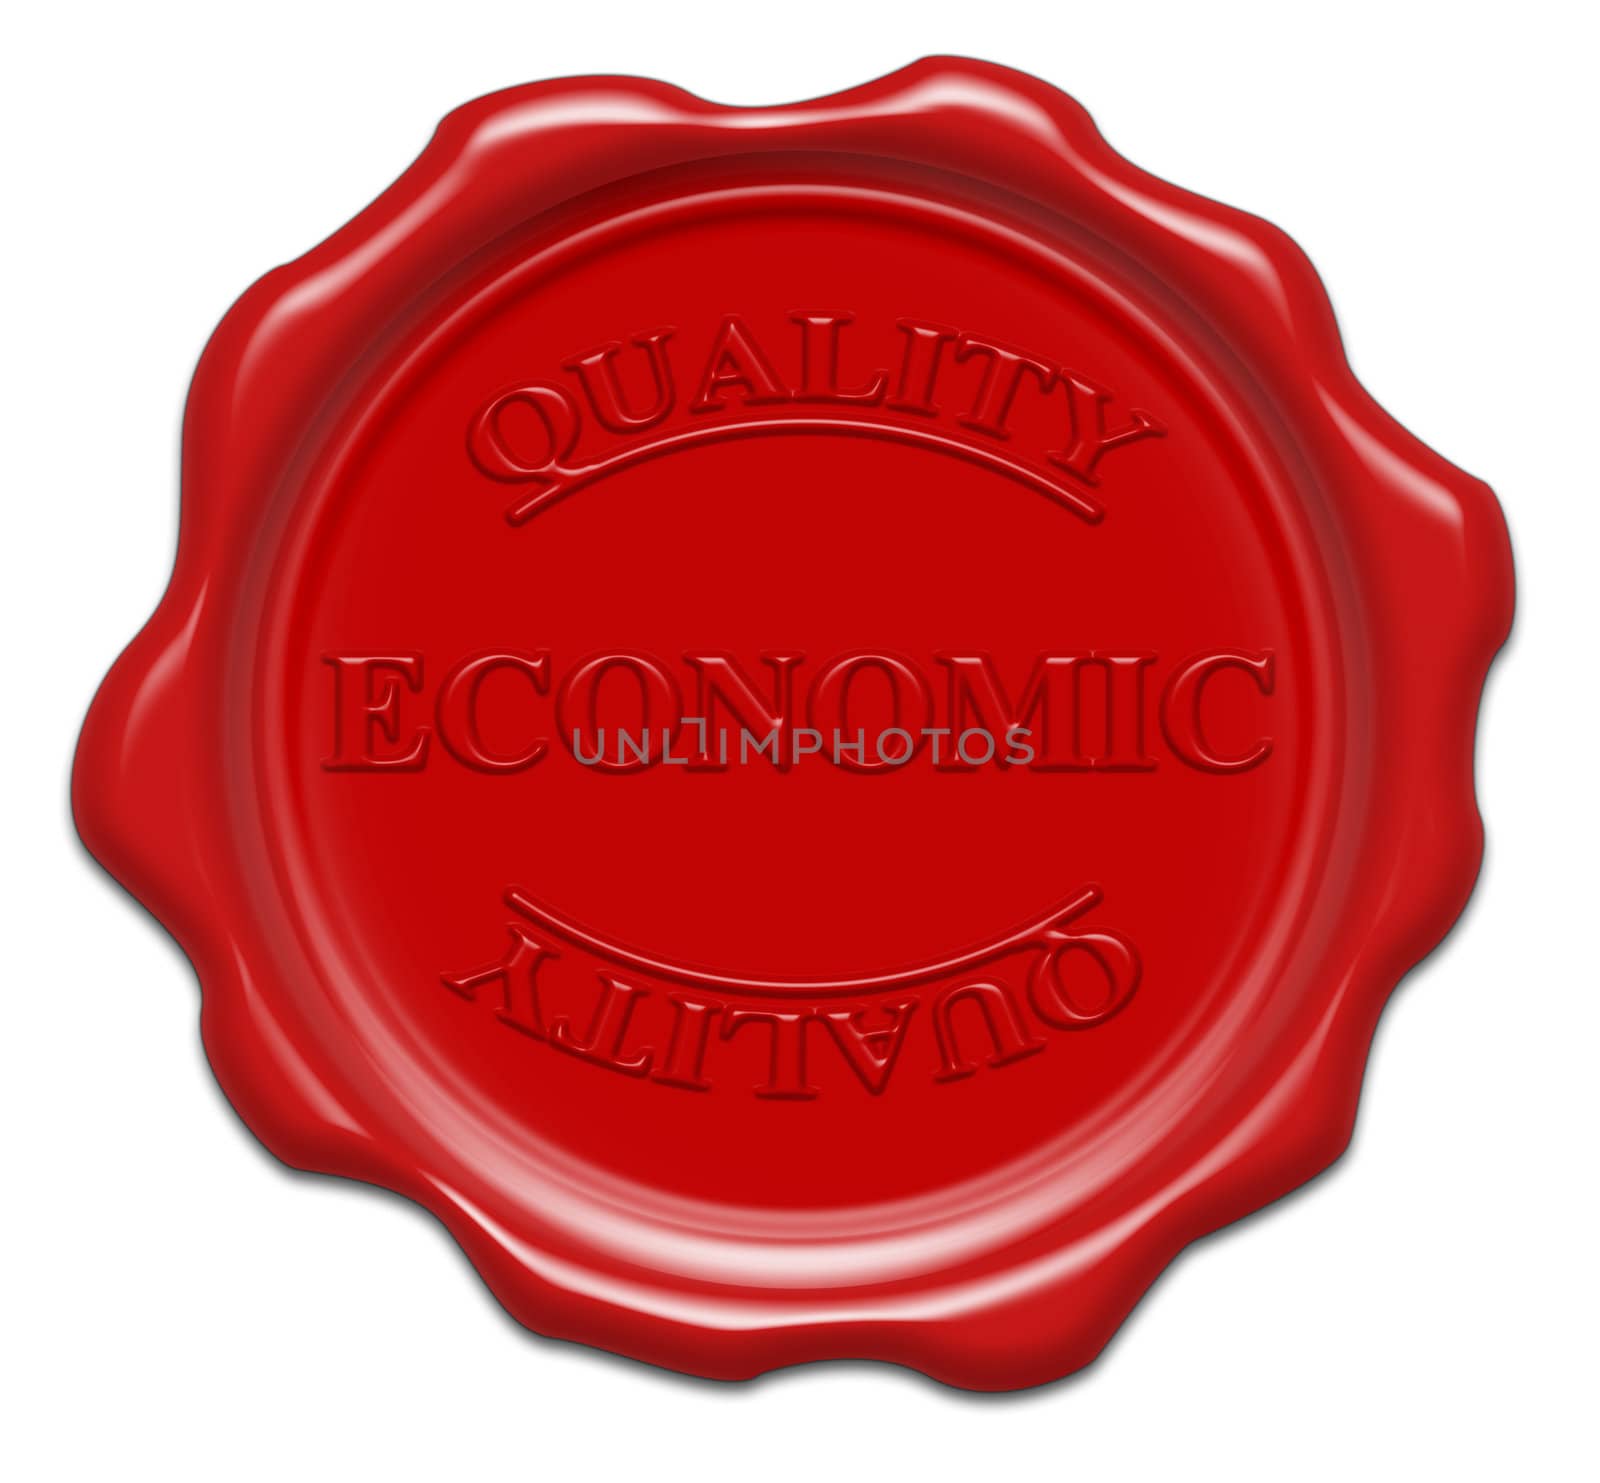 quality economic - illustration red wax seal isolated on white b by mozzyb